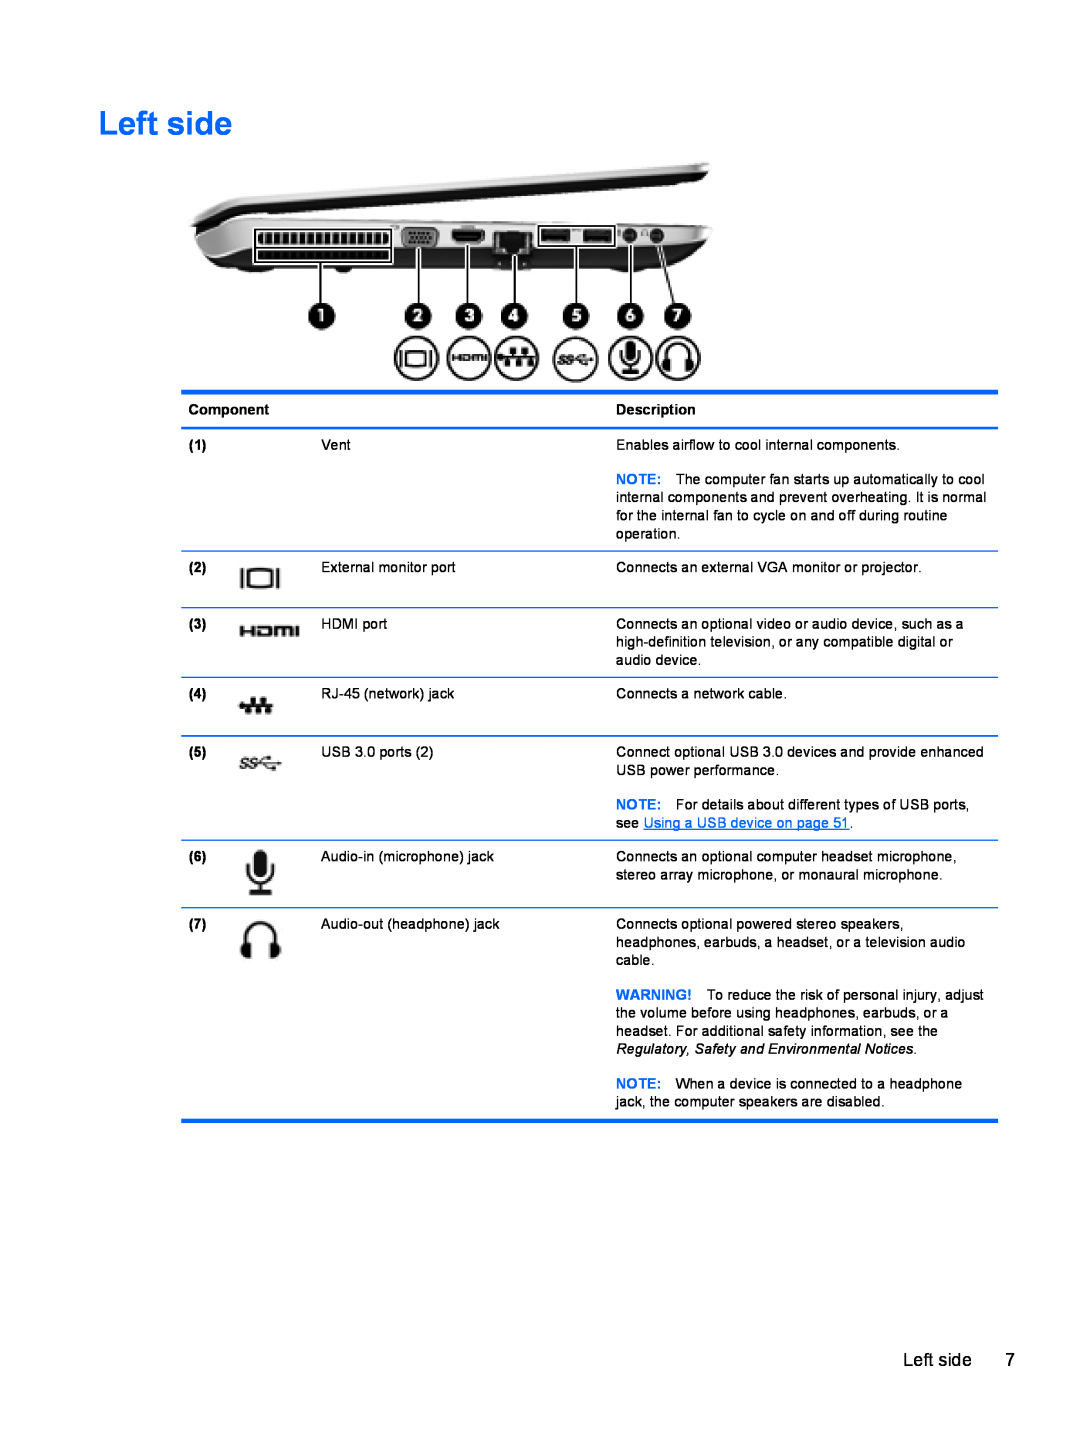 HP C2L36UA#ABA, C7S02UA#ABA, C2M17UA#ABA manual Left side, see Using a USB device on page 